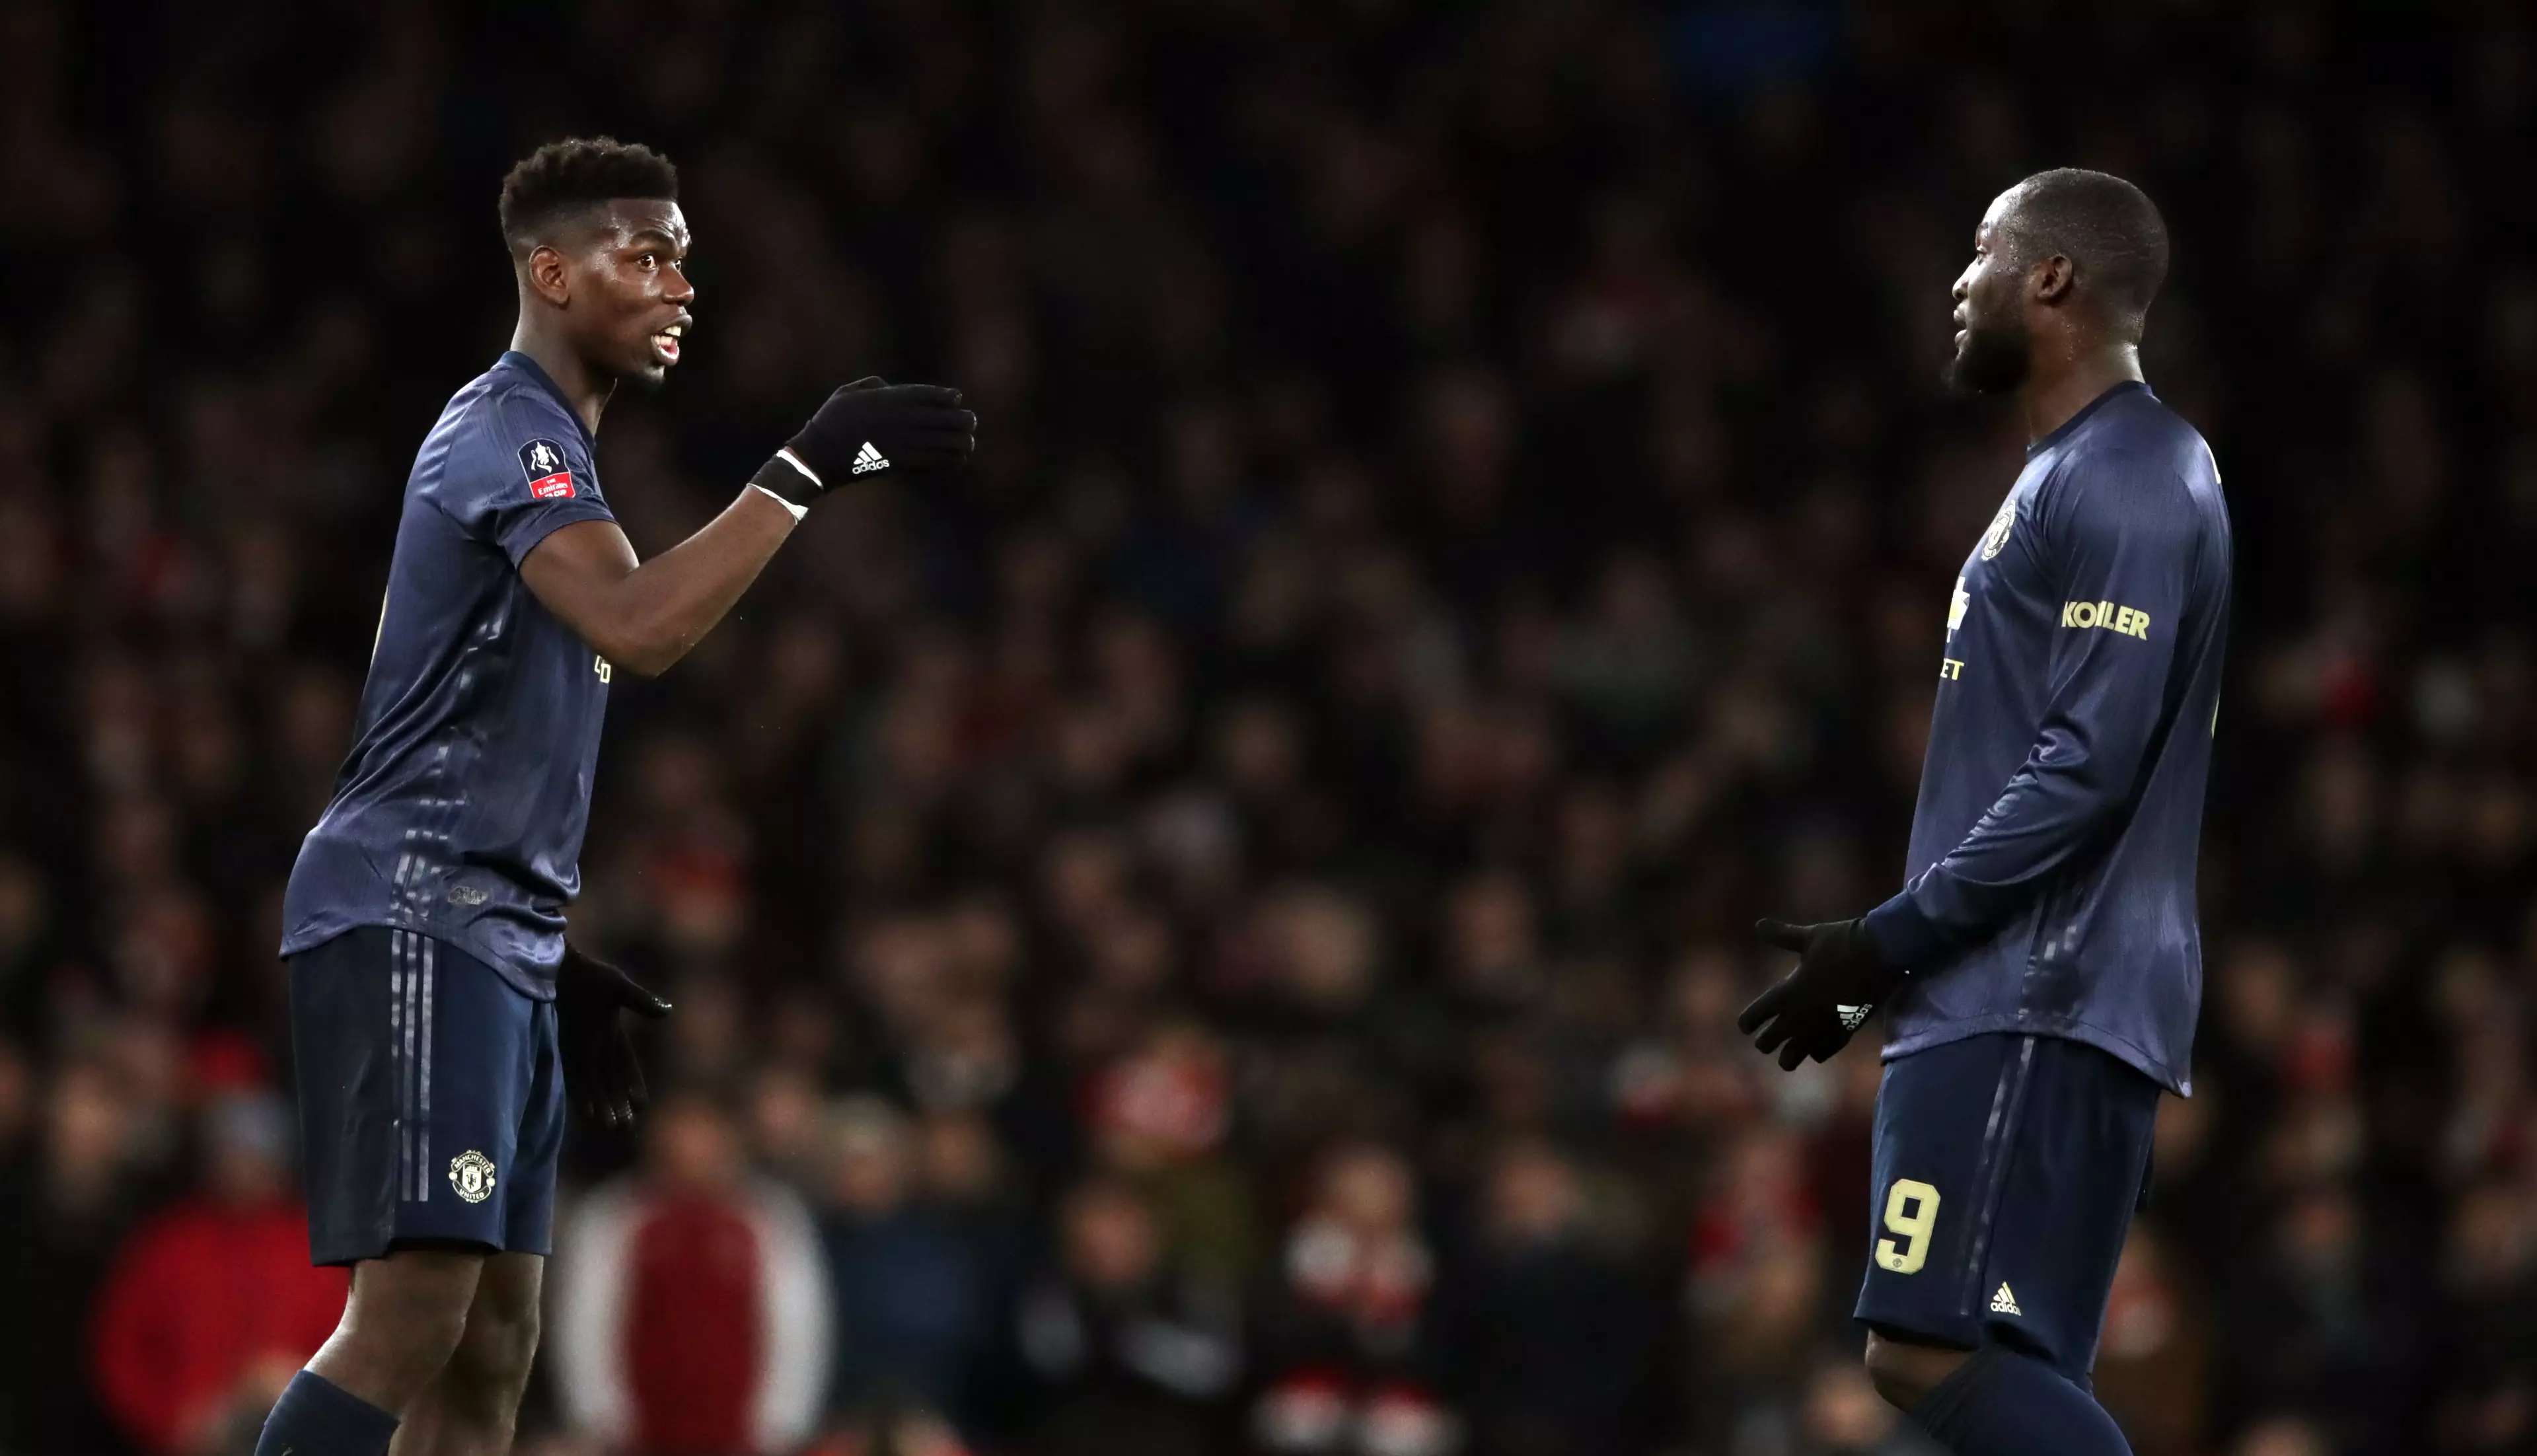 Pogba, left, stayed at the club but Lukaku, right, has left for Serie A. Image: PA Images